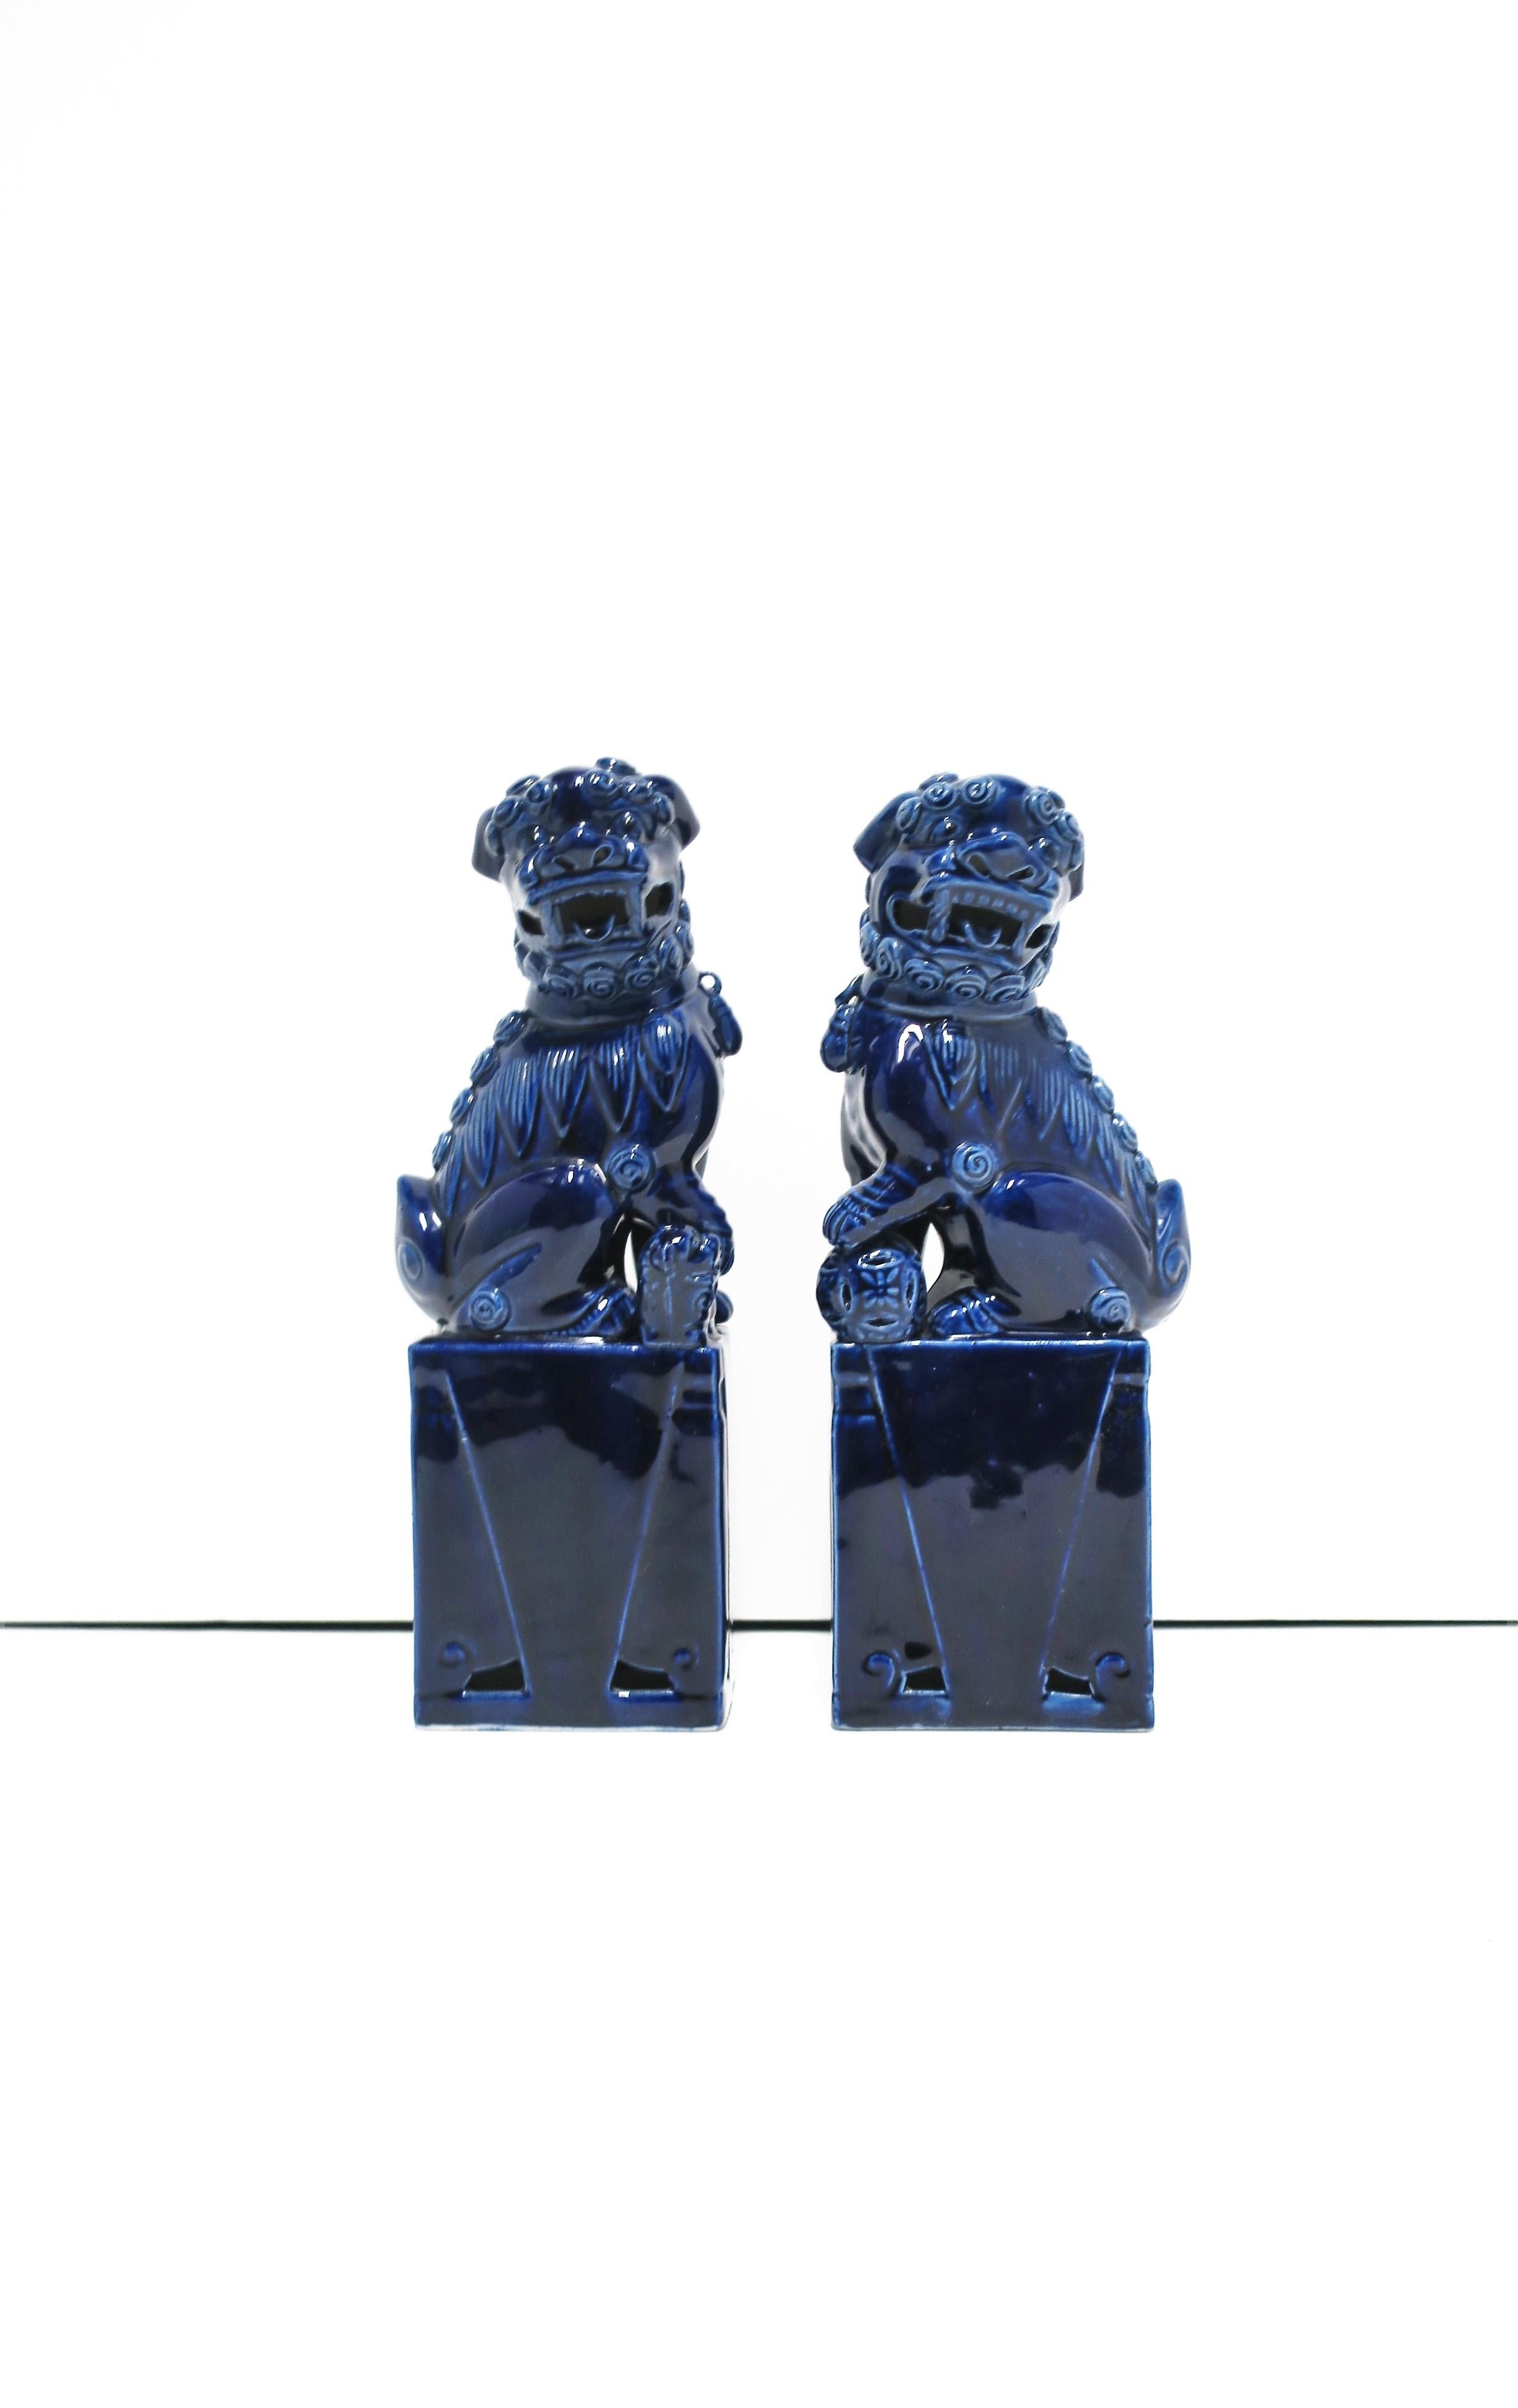 A beautiful pair of relatively tall dark blue or 'ink' blue ceramic Lion Foo dogs' decorative objects or bookends, circa late-20th century, English rule Hong Kong. Dimensions: 9.75